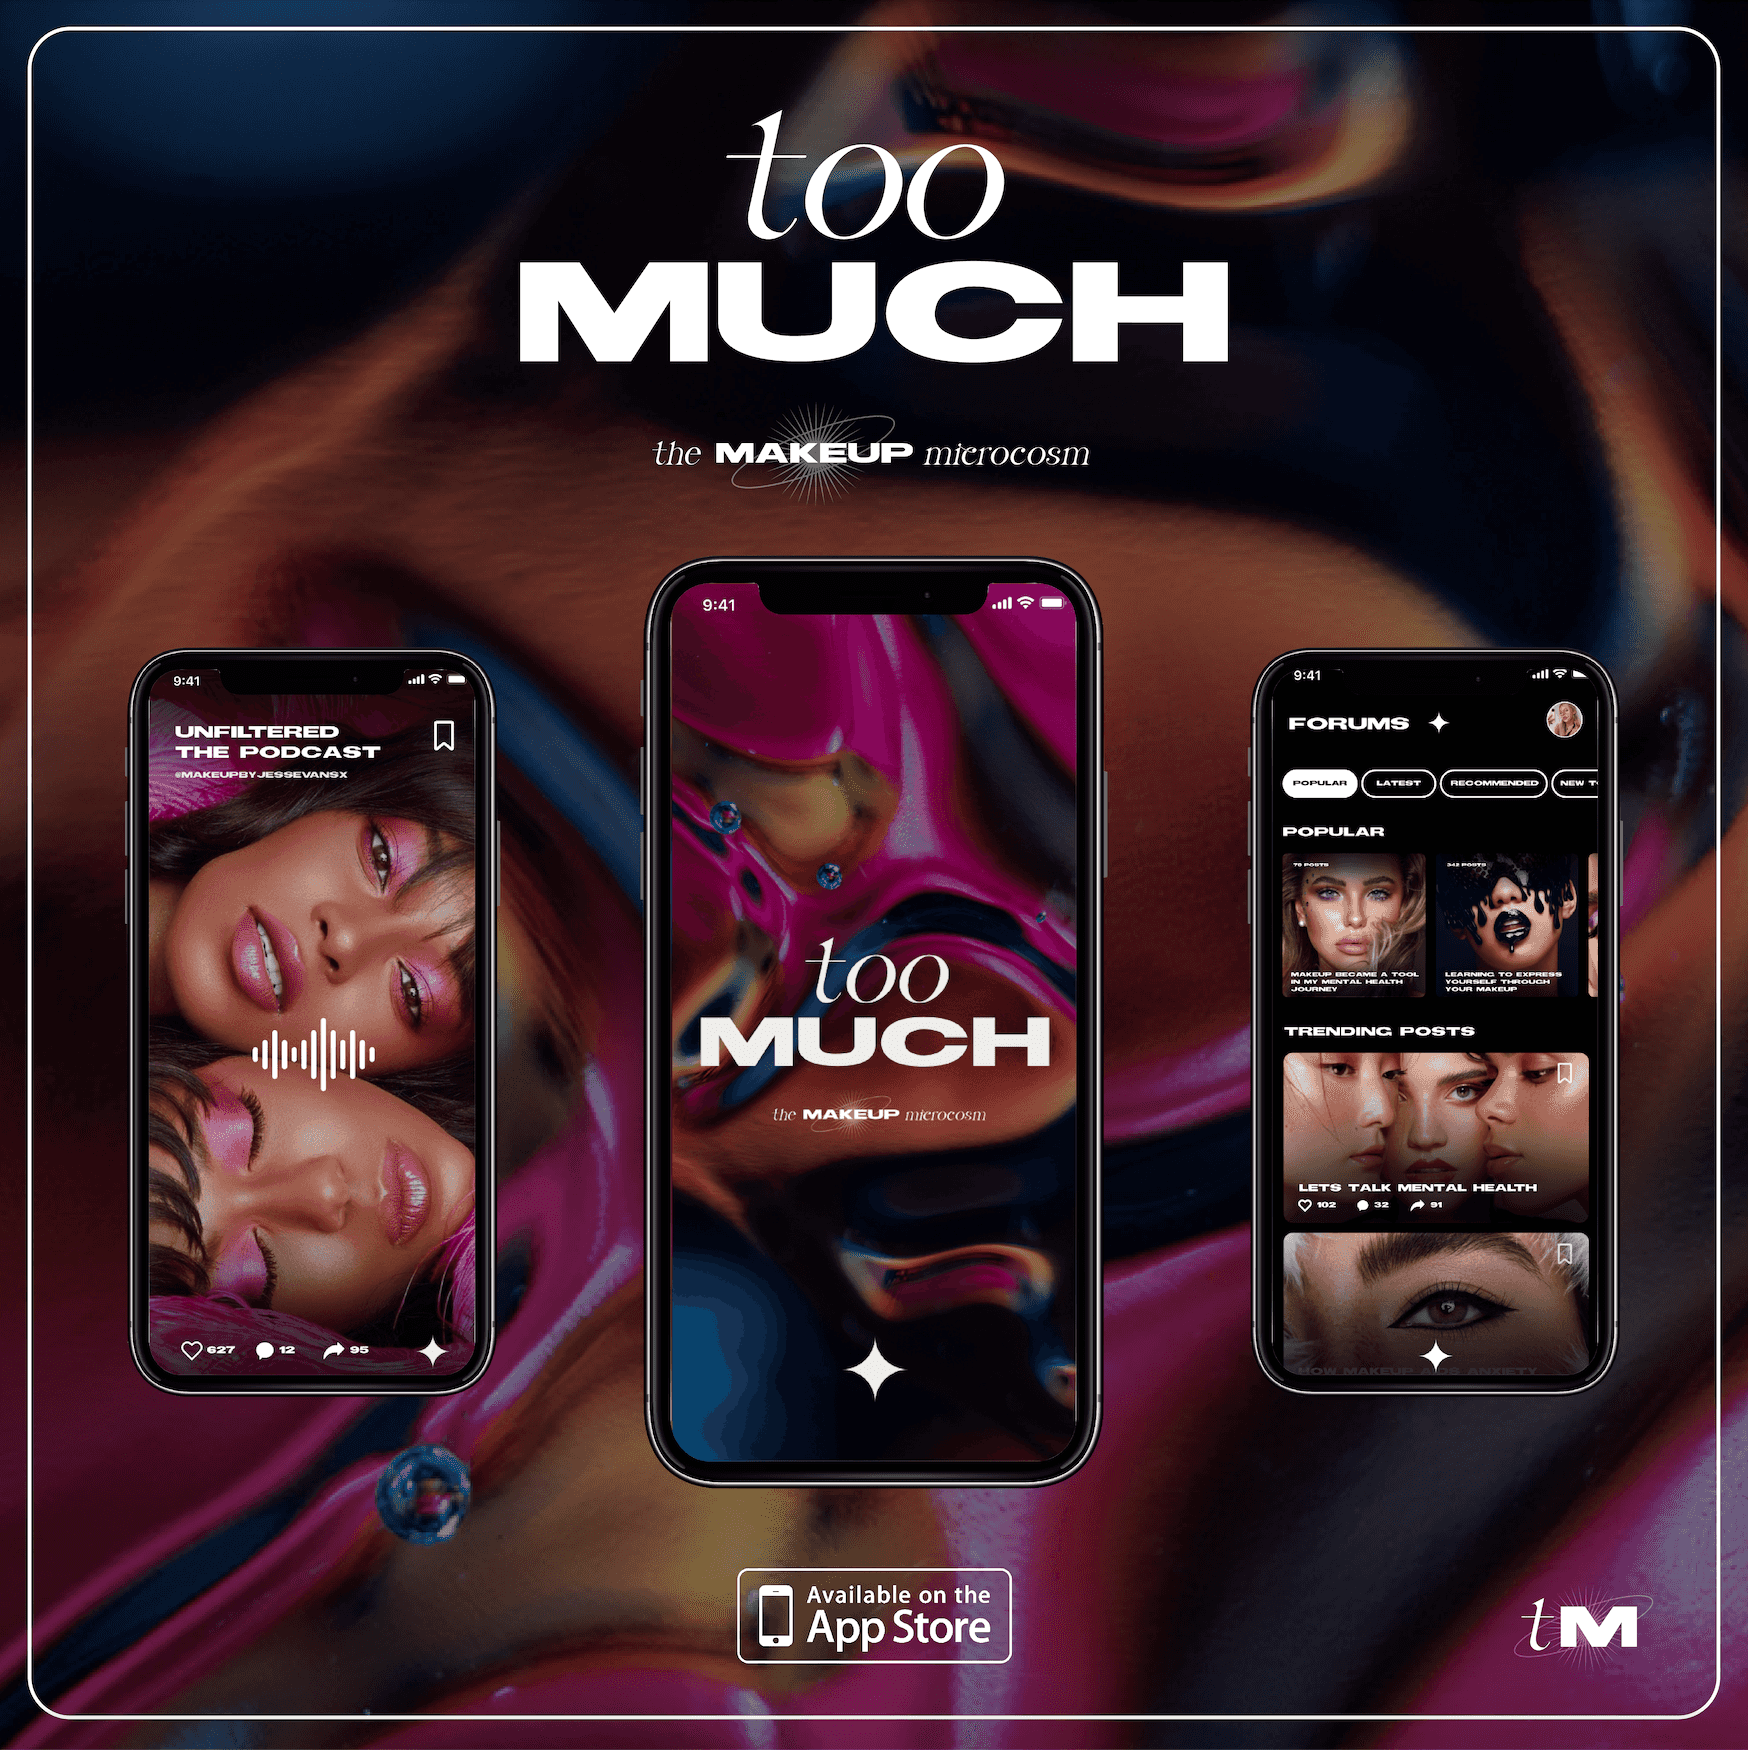 TOO MUCH - Too Much is an online campaign proposal with the aim to confront makeup shaming and the double standards surrounding makeup by encouraging people to be too much. The campaign consists of digital promotional content for social media as well as the too much app, the makeup microcosm.